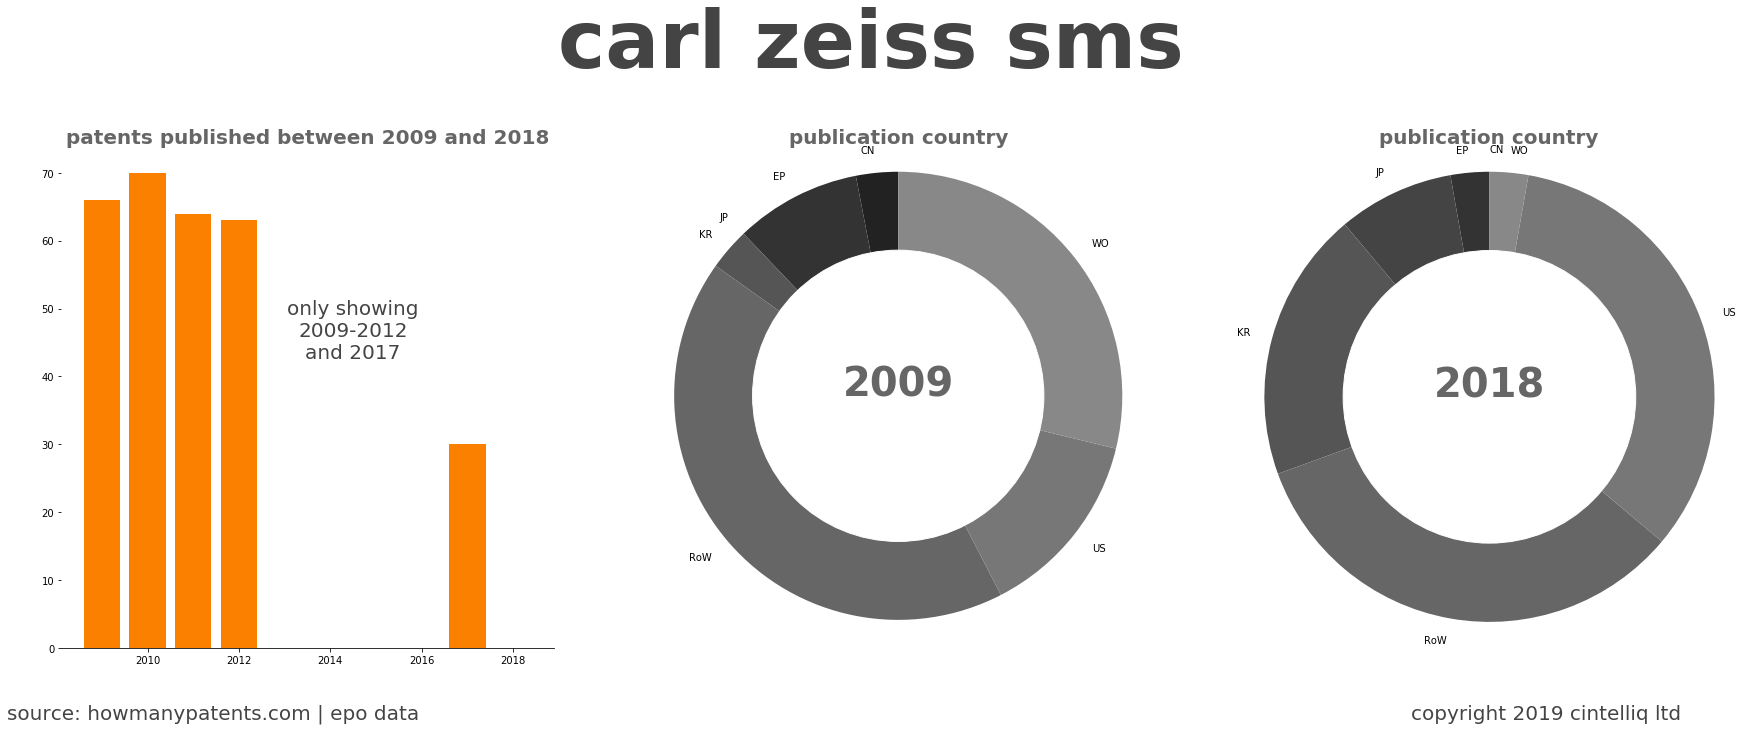 summary of patents for Carl Zeiss Sms